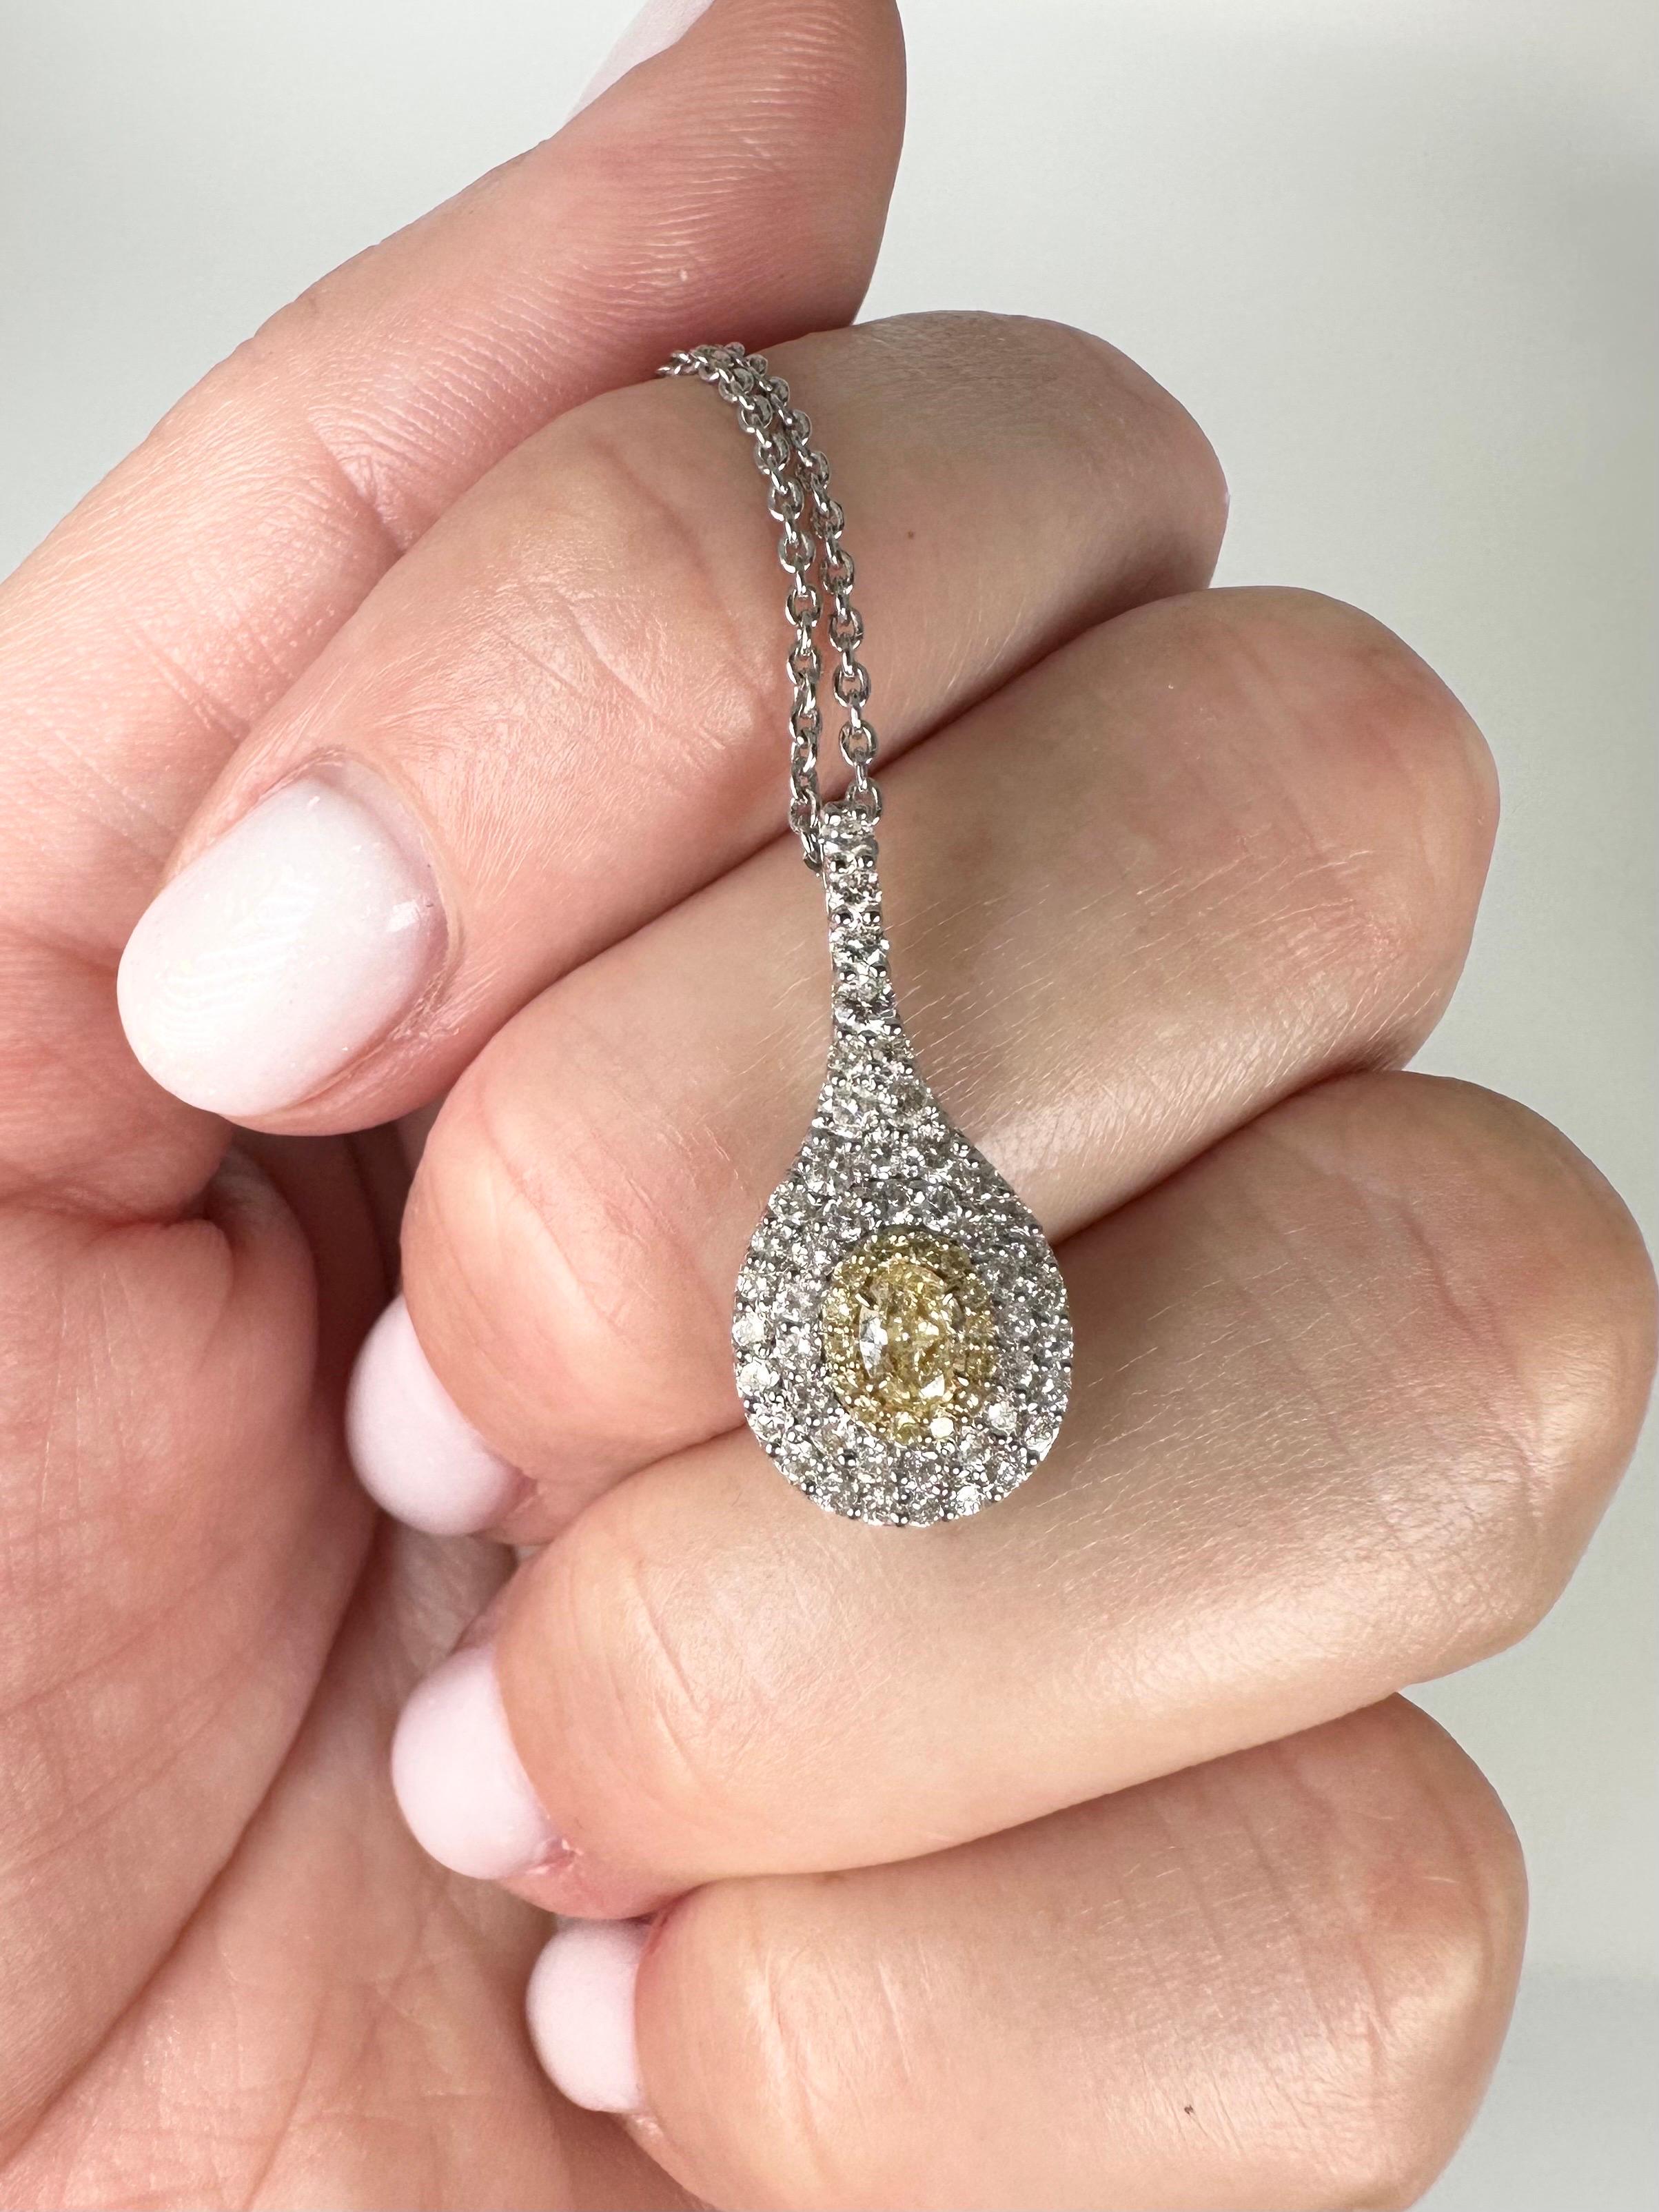 Fancy yellow diamond pendant necklace in 18KT white gold, stunning classical pendant that will complement any outfit!

GOLD: 18KT gold
NATURAL DIAMOND(S)
Clarity/Color: VS/G
Carat:0.30ct
Cut:Round Brilliant
NATURAL YELLOW